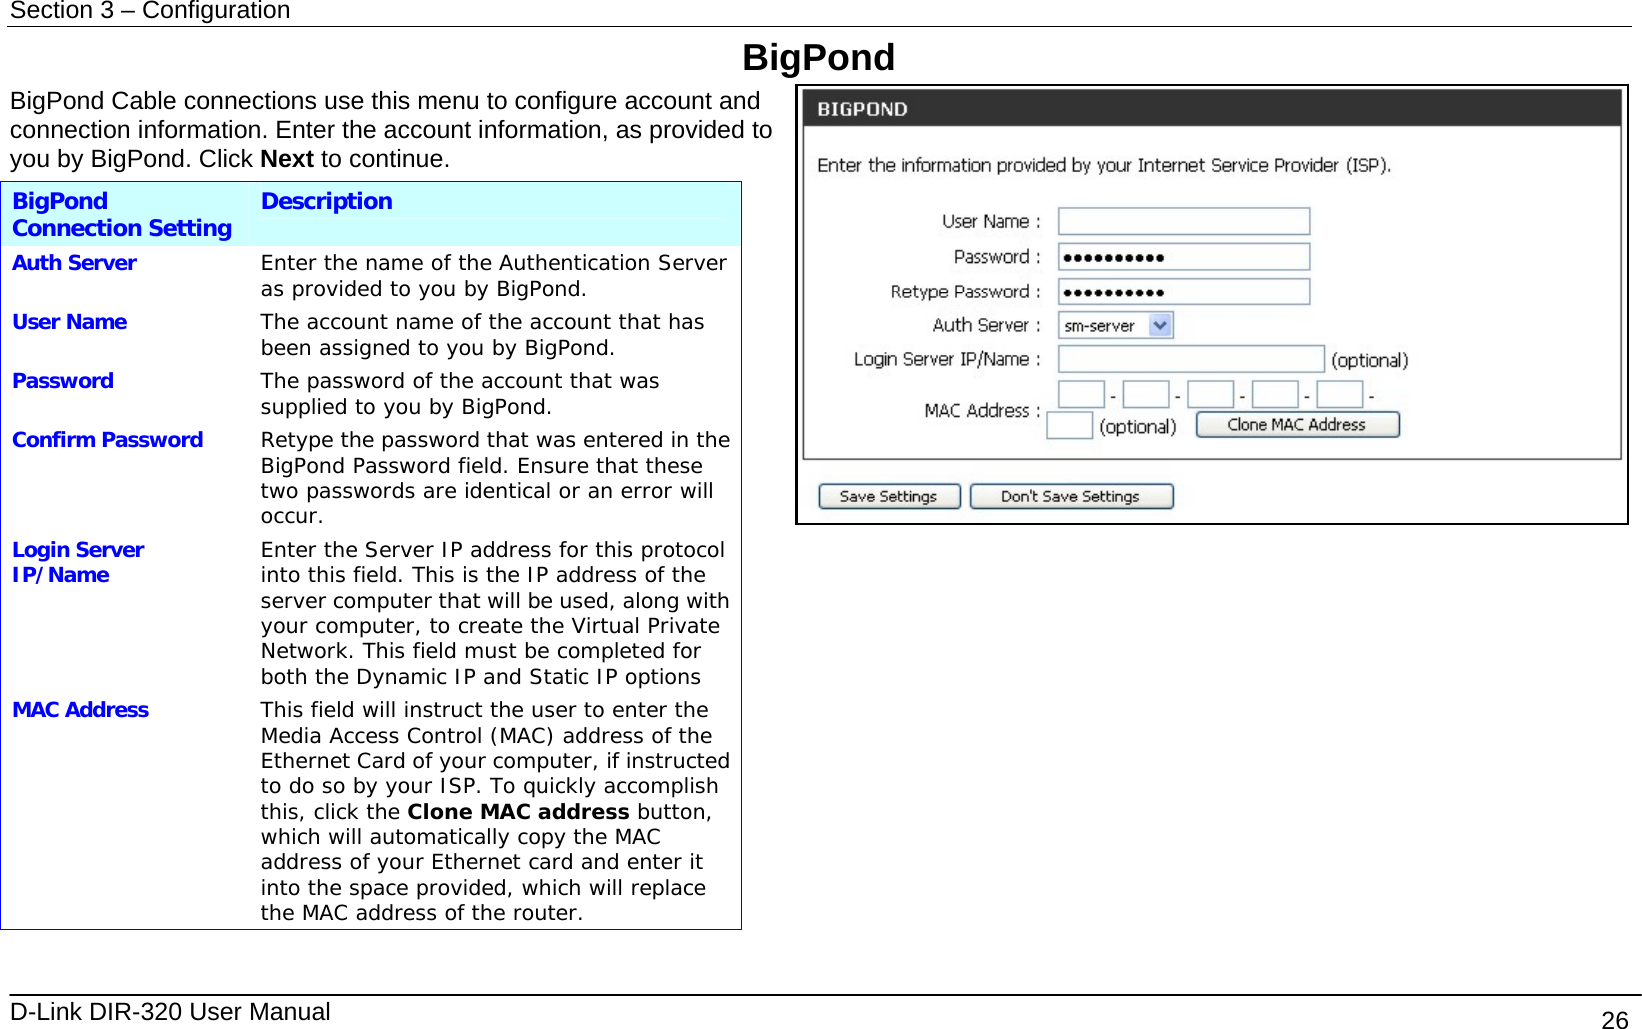 Section 3 – Configuration   D-Link DIR-320 User Manual                                       26 BigPond BigPond Cable connections use this menu to configure account and connection information. Enter the account information, as provided to you by BigPond. Click Next to continue. BigPond Connection Setting Description Auth Server  Enter the name of the Authentication Server as provided to you by BigPond. User Name  The account name of the account that has been assigned to you by BigPond. Password  The password of the account that was supplied to you by BigPond. Confirm Password  Retype the password that was entered in the BigPond Password field. Ensure that these two passwords are identical or an error will occur. Login Server IP/Name  Enter the Server IP address for this protocol into this field. This is the IP address of the server computer that will be used, along with your computer, to create the Virtual Private Network. This field must be completed for both the Dynamic IP and Static IP options MAC Address  This field will instruct the user to enter the Media Access Control (MAC) address of the Ethernet Card of your computer, if instructed to do so by your ISP. To quickly accomplish this, click the Clone MAC address button, which will automatically copy the MAC address of your Ethernet card and enter it into the space provided, which will replace the MAC address of the router.  